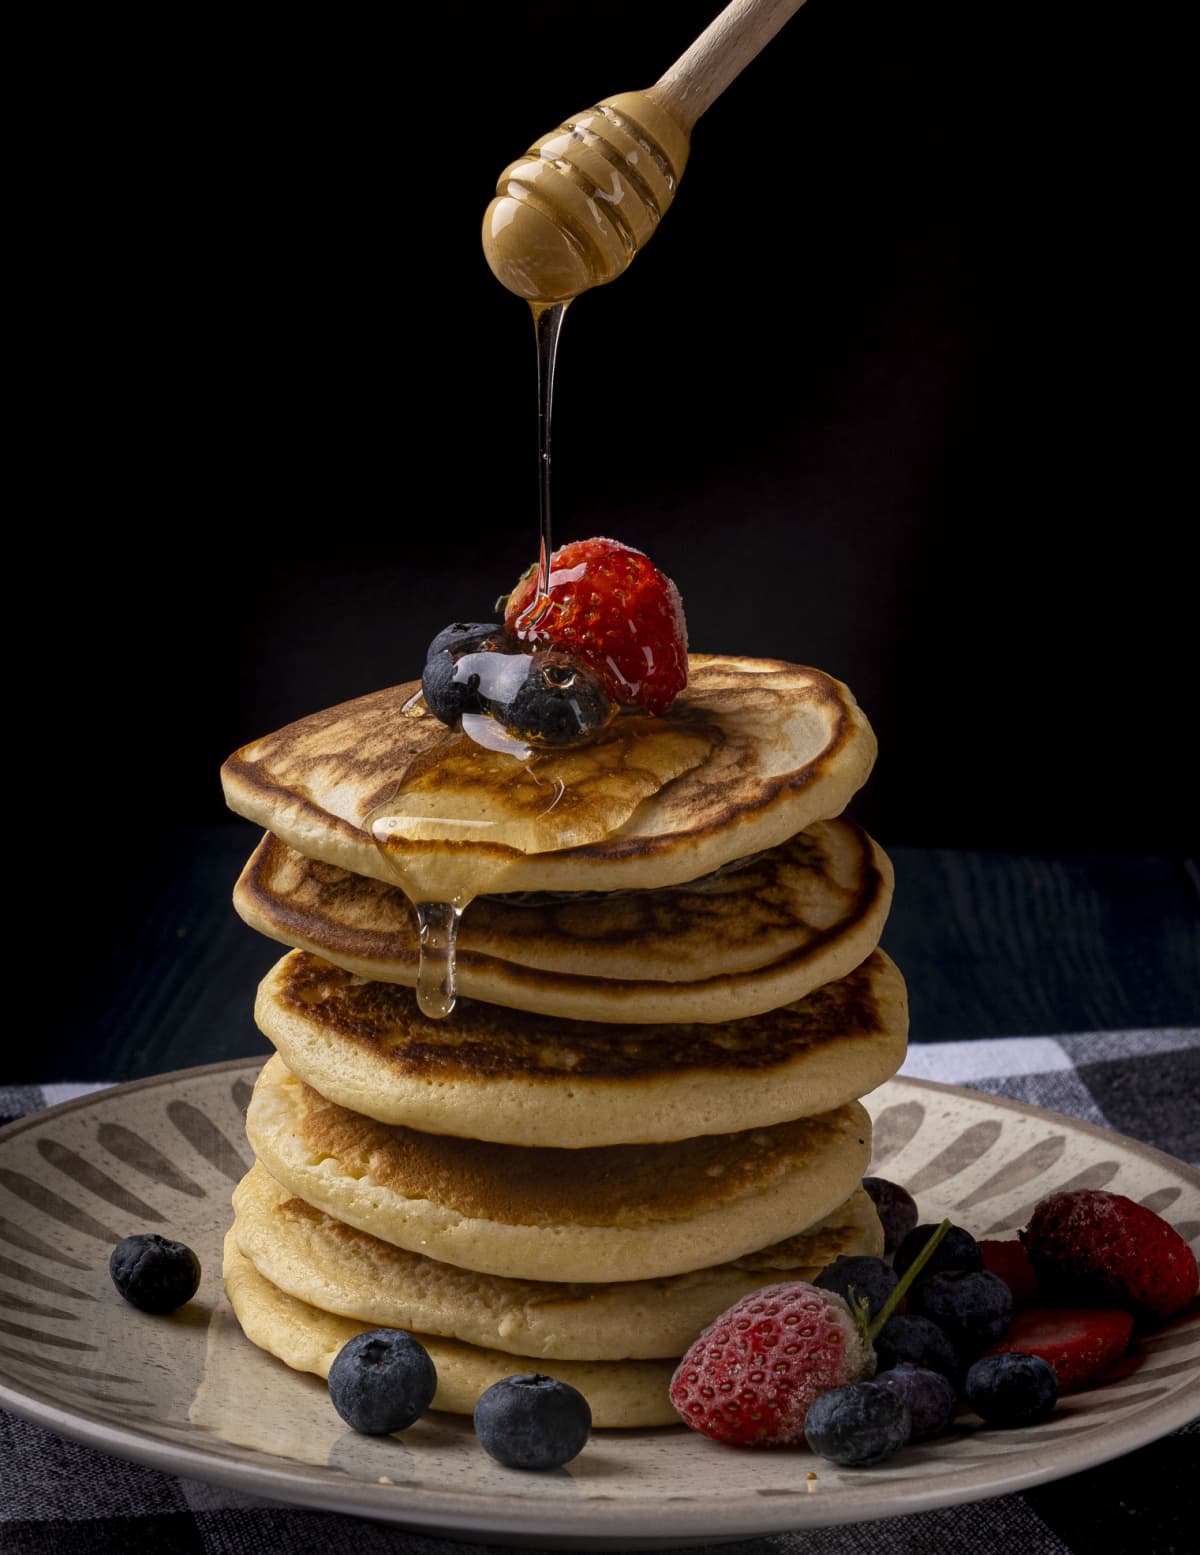 Honey Pancakes with fruit on a black background.